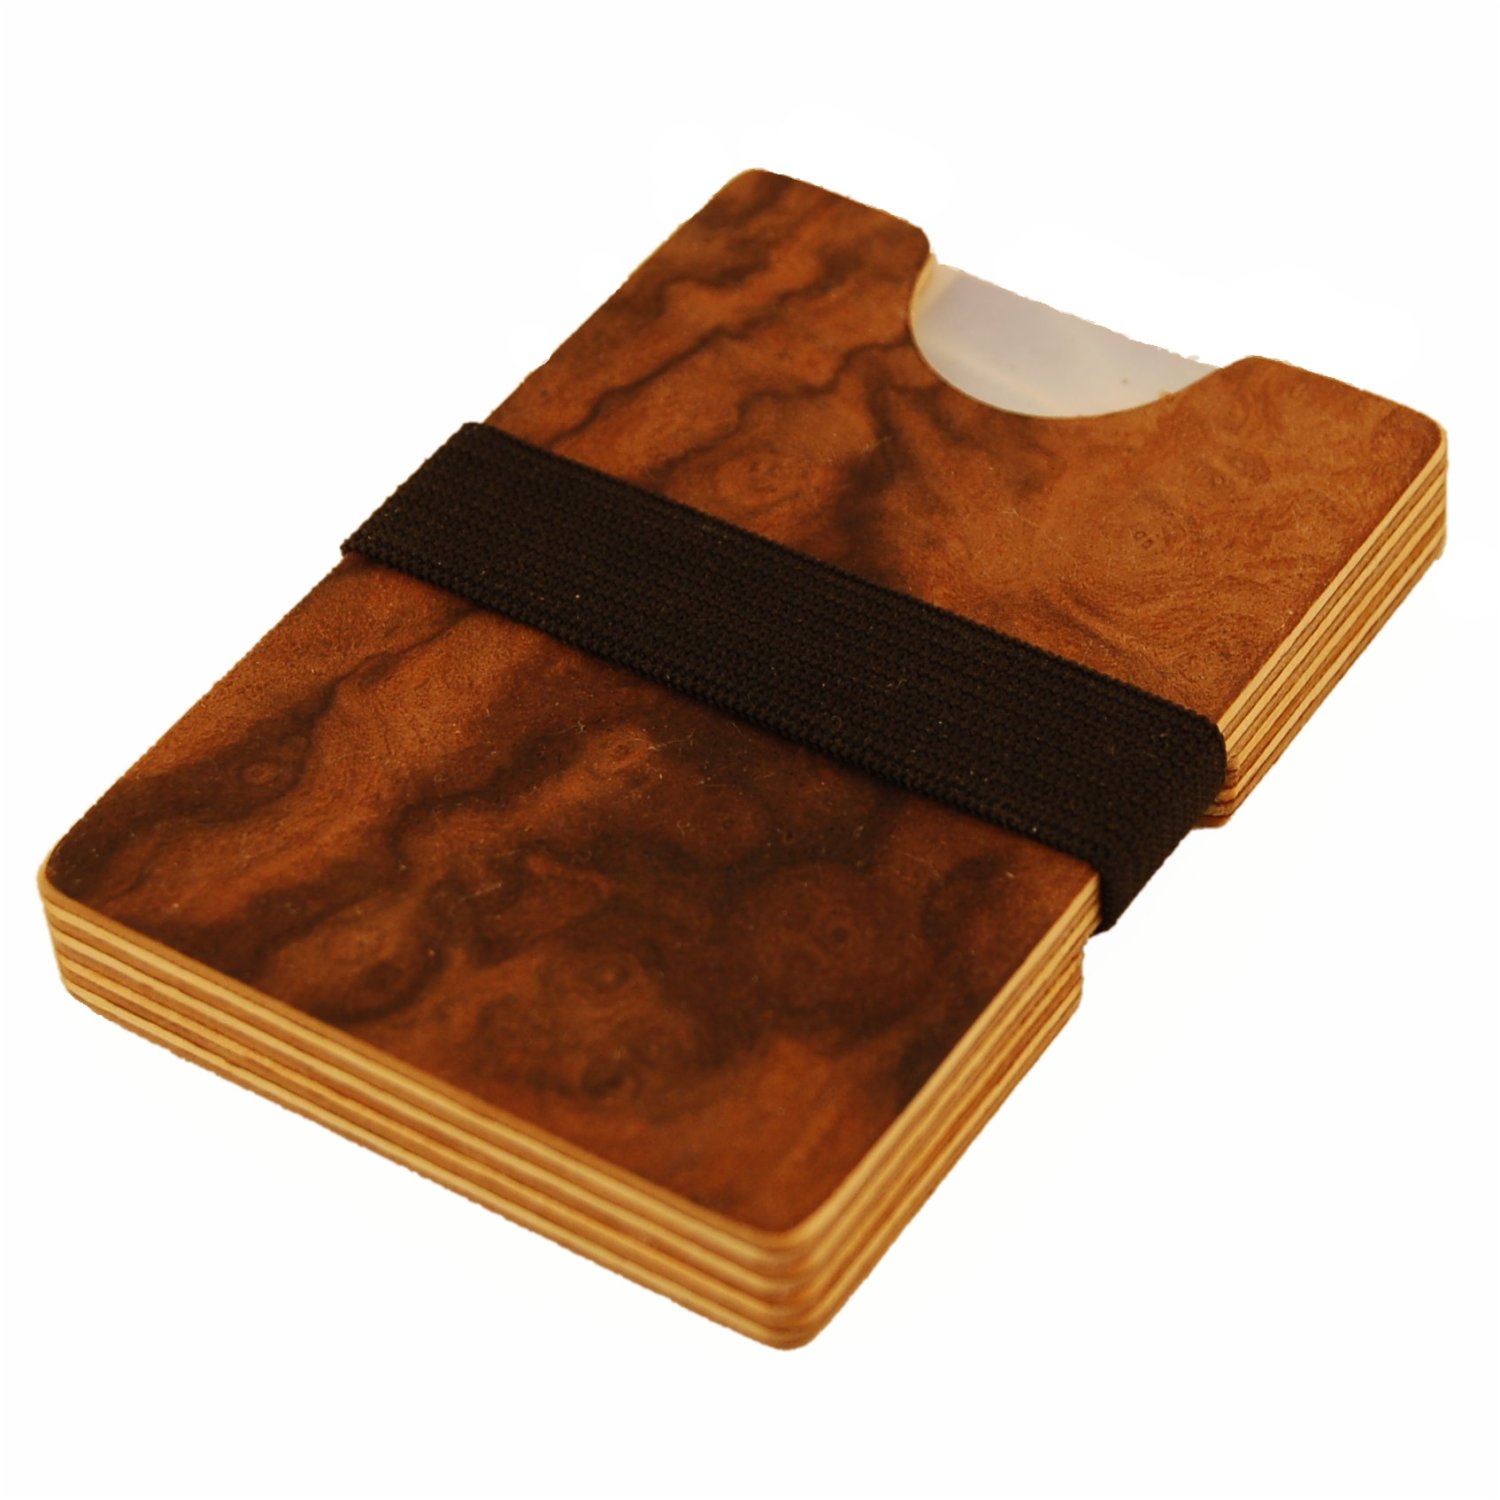 Extra thin wooden wallet